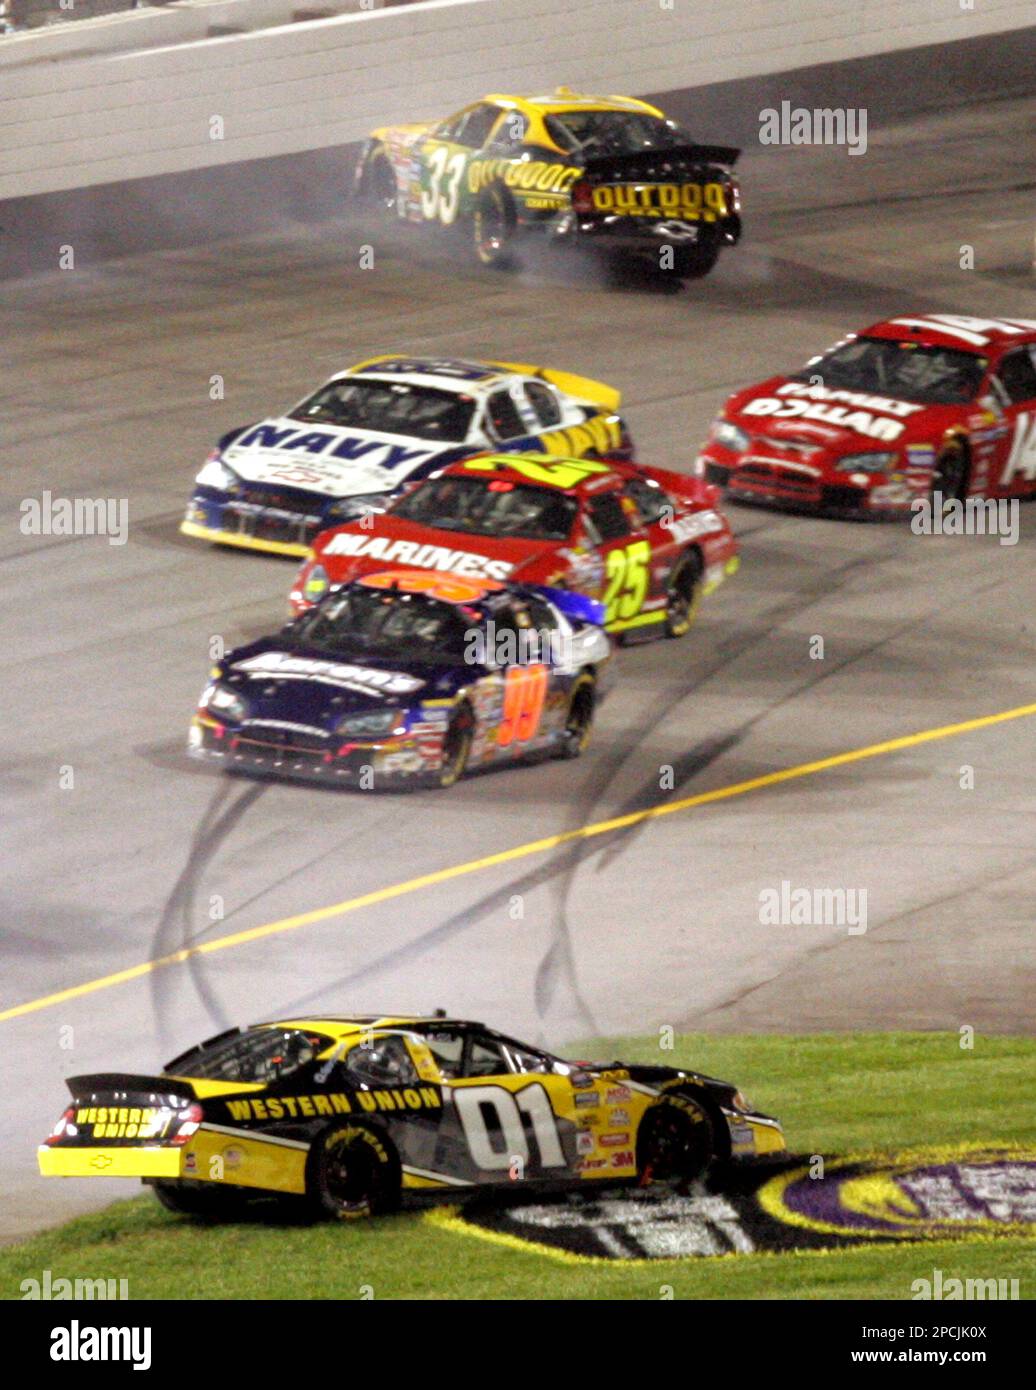 Jay Sauter (01) spins out in the infield as Ron Hornaday Jr. (33) spins  near the wall as other drivers pass by during the NASCAR Busch Series'  Emerson Radio 250 auto race